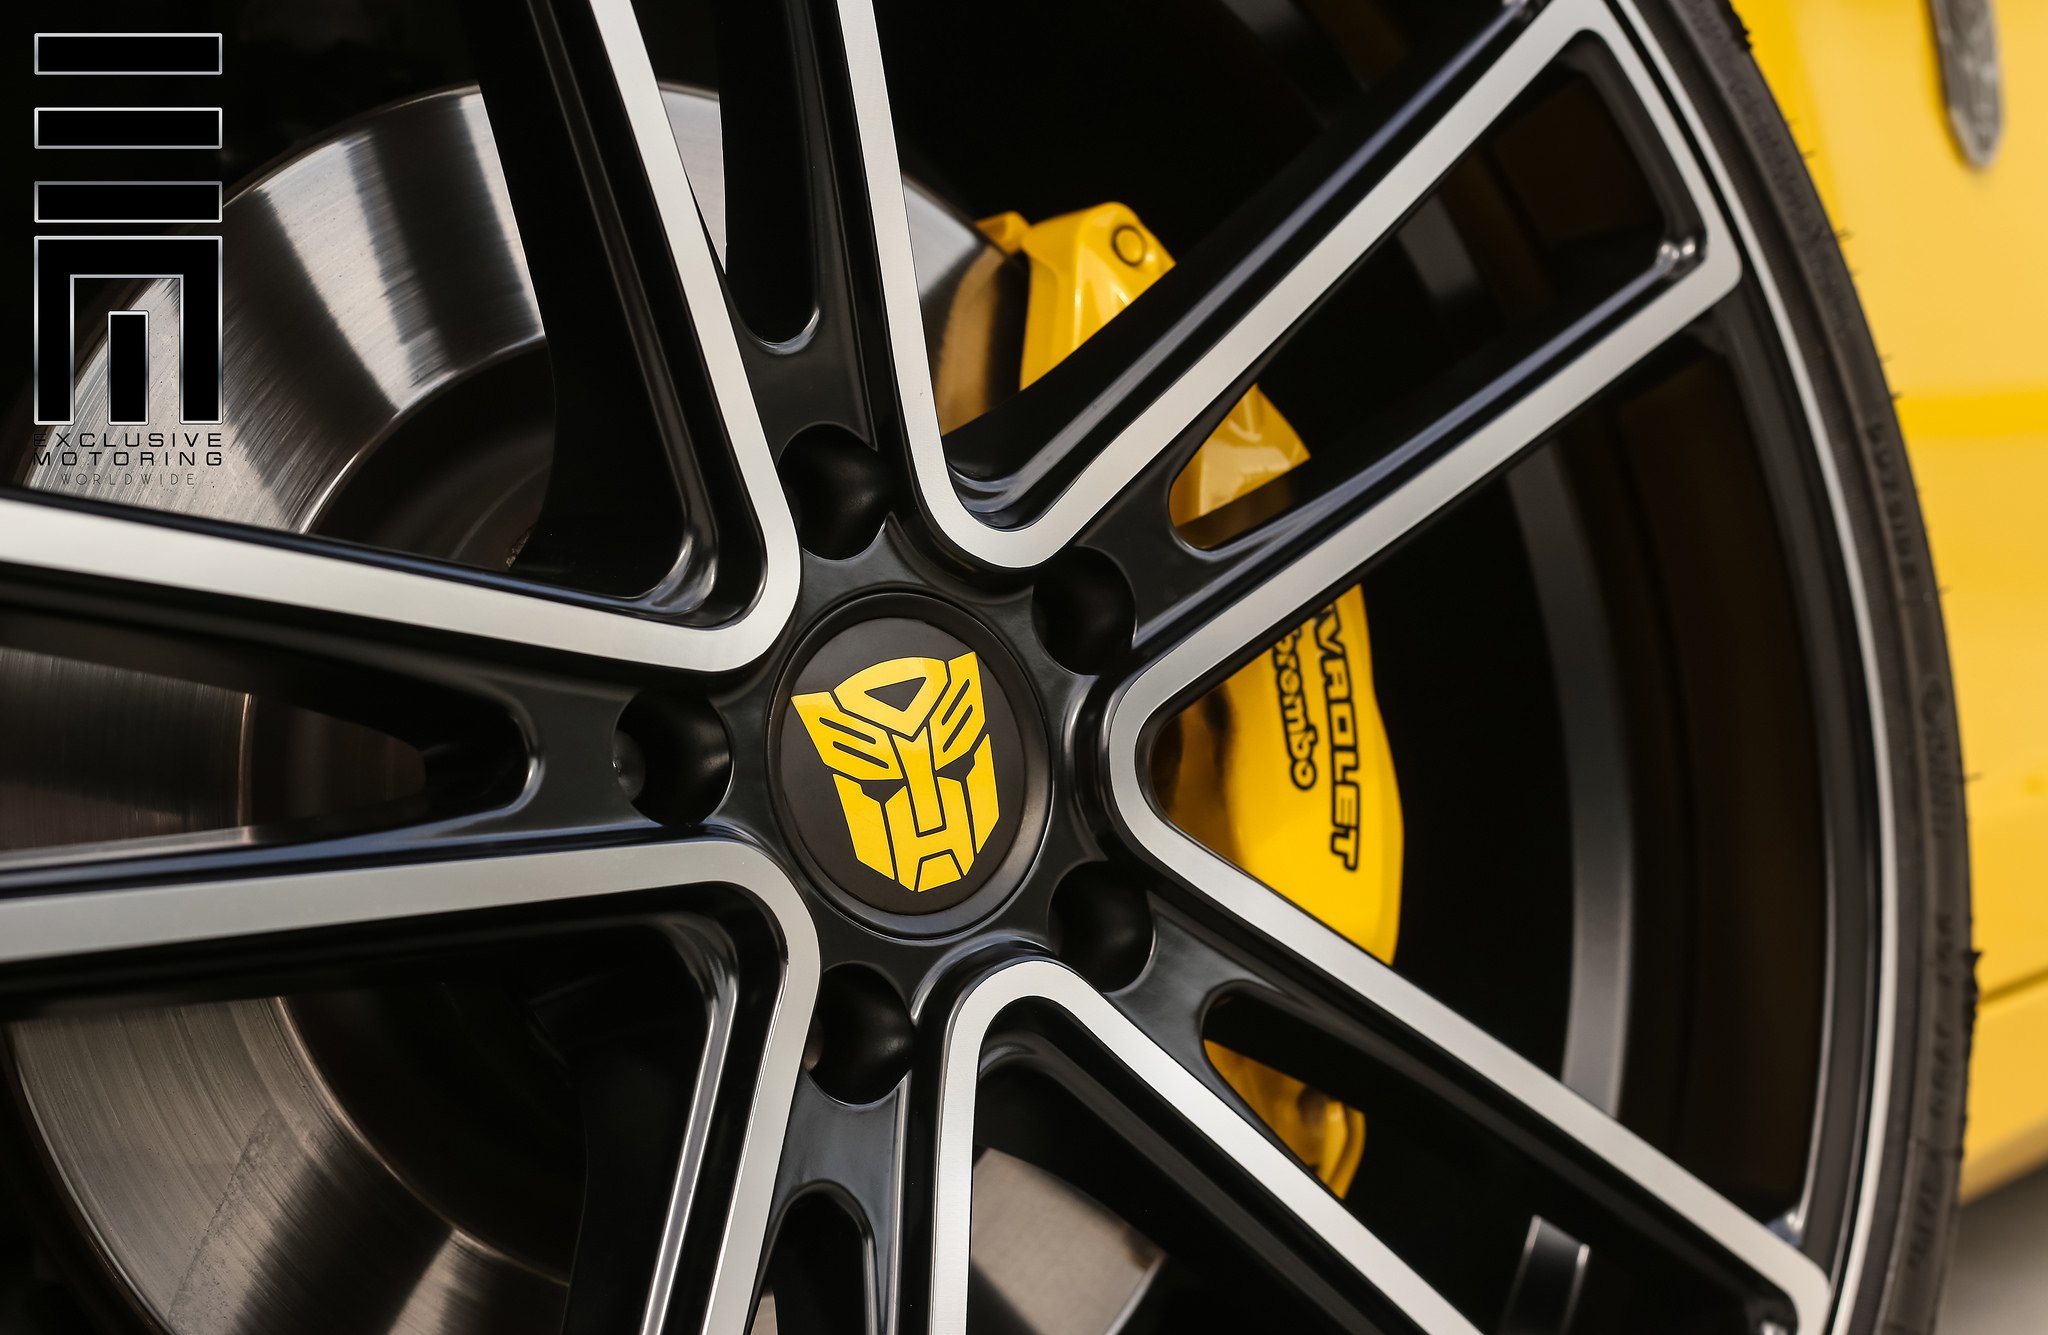 Brembo brakes on Bumblebee Chevy Camaro SS  - Photo by Exclusive Motoring